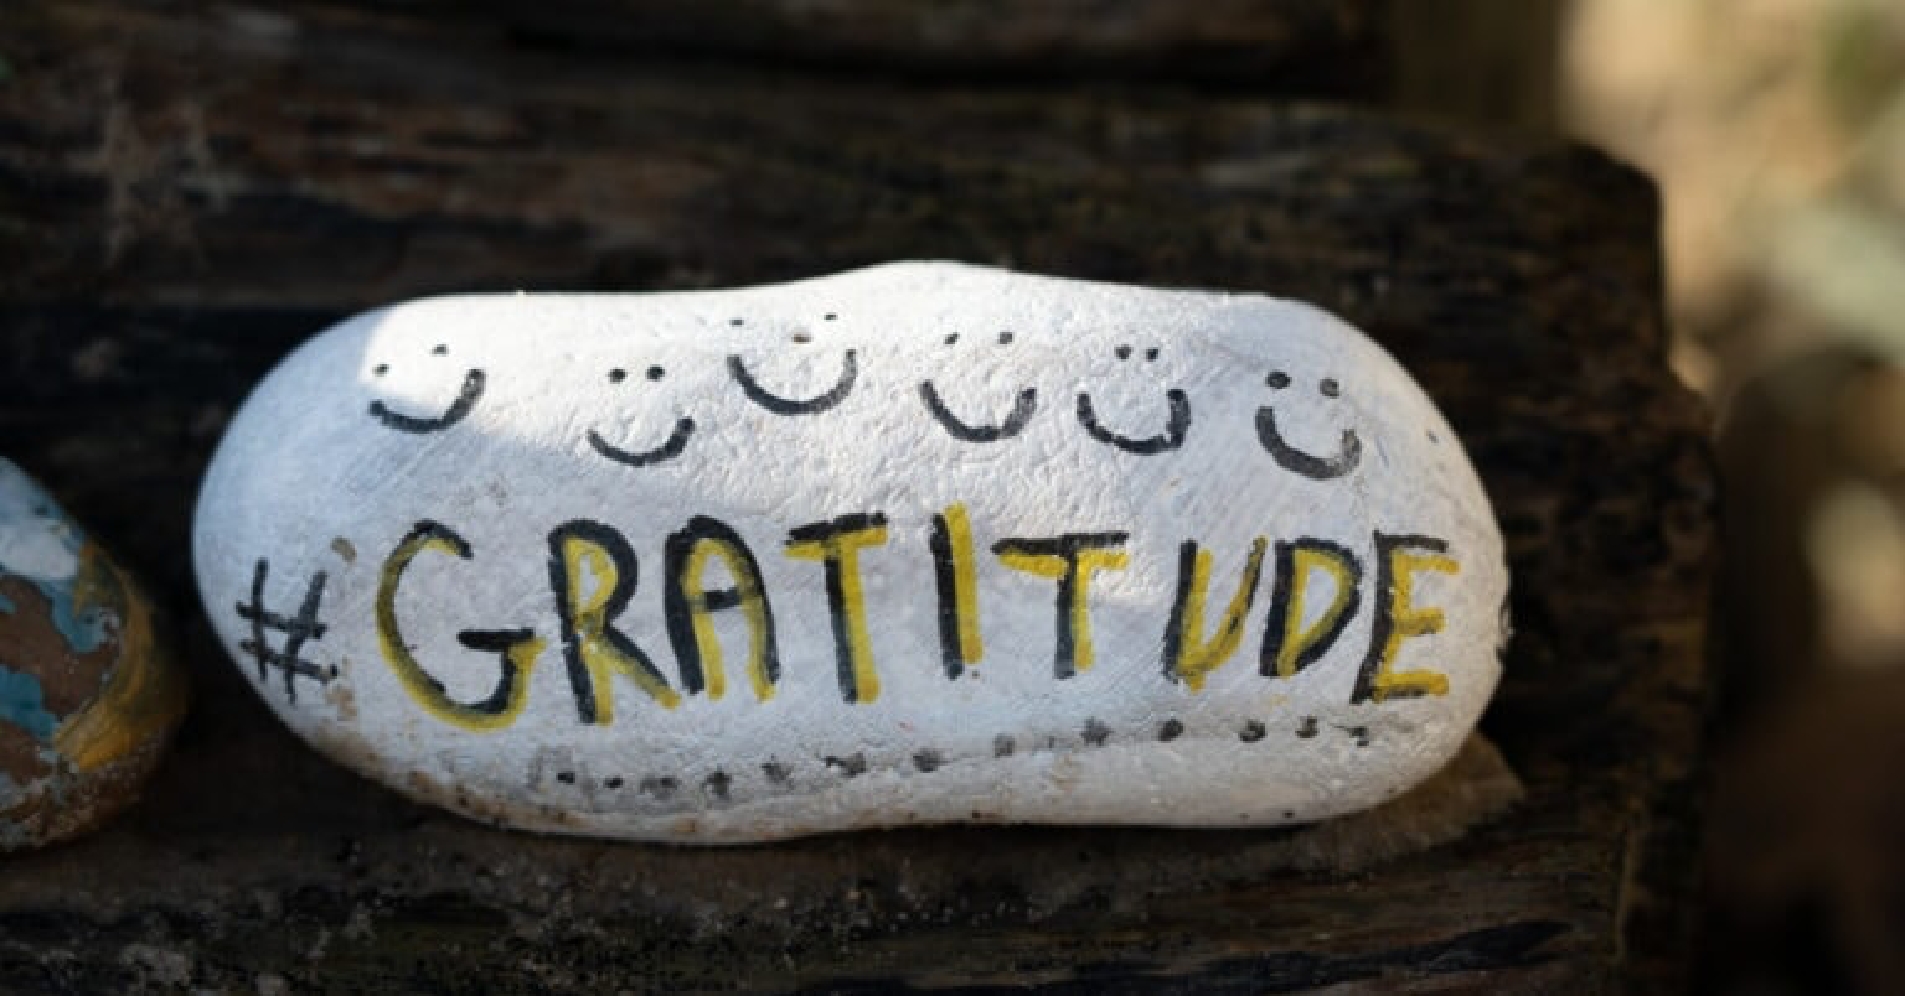 Rock with smiles and written word "Gratitude"